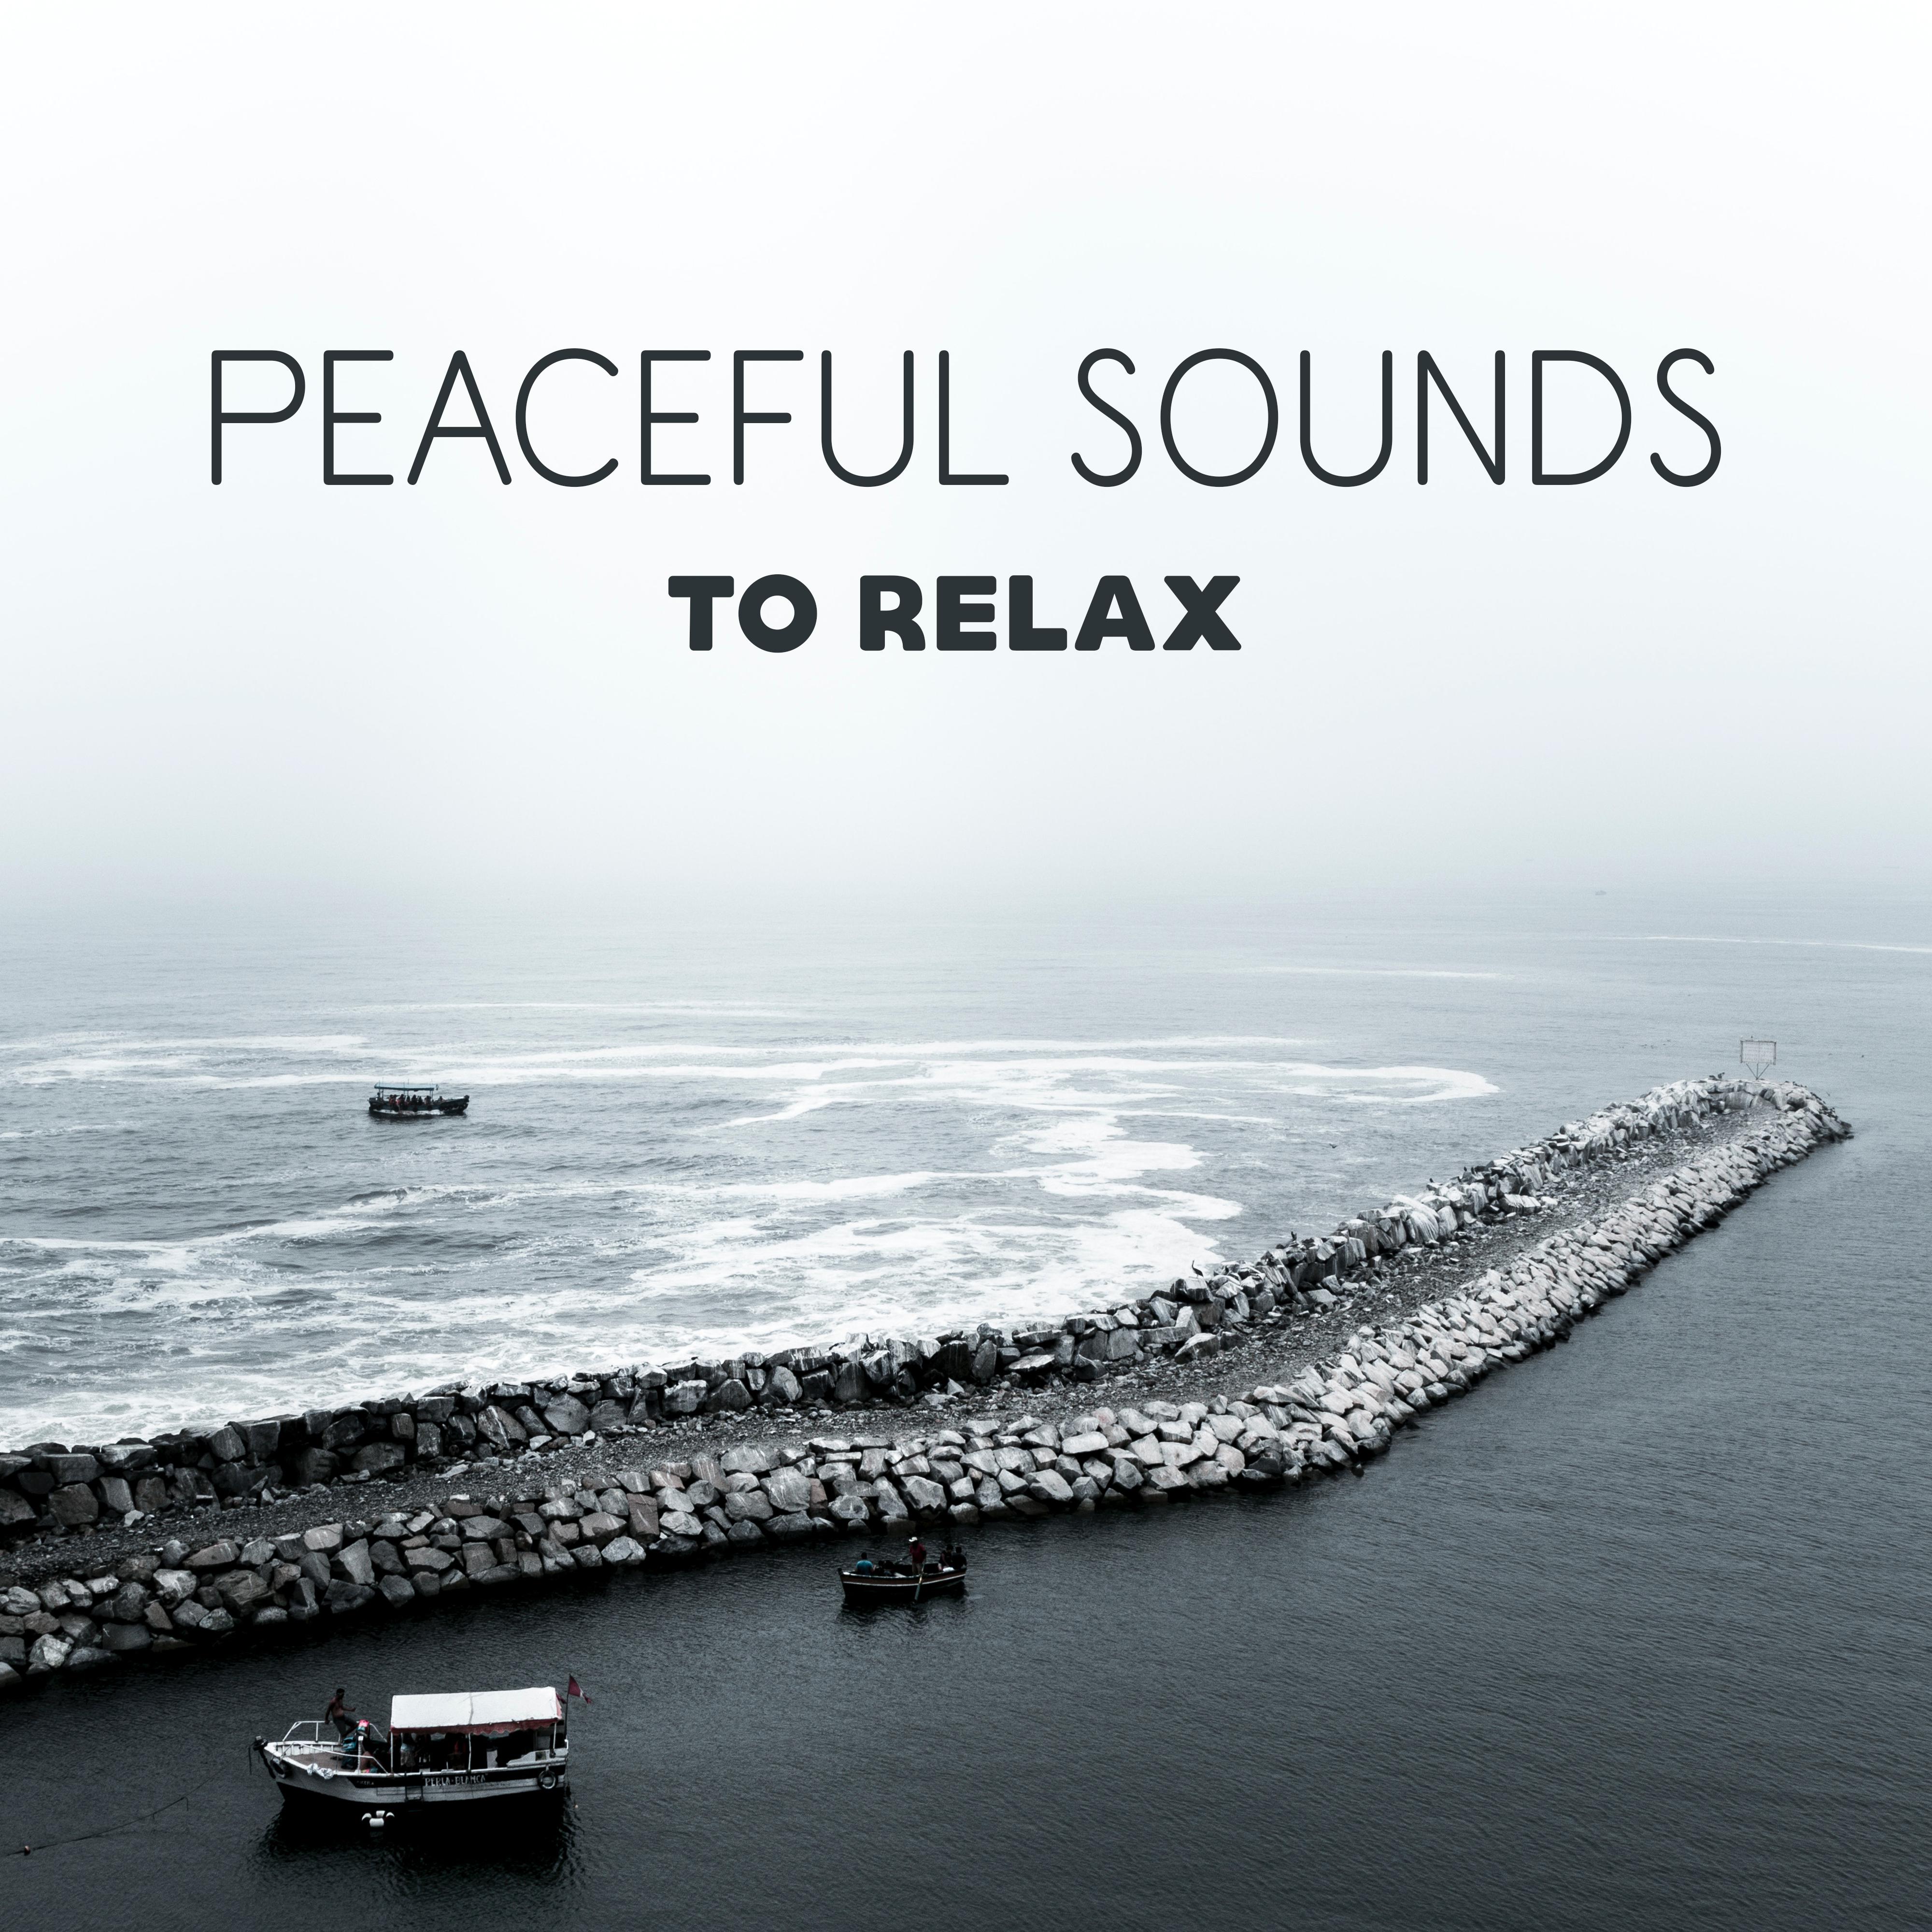 Peaceful Sounds to Relax